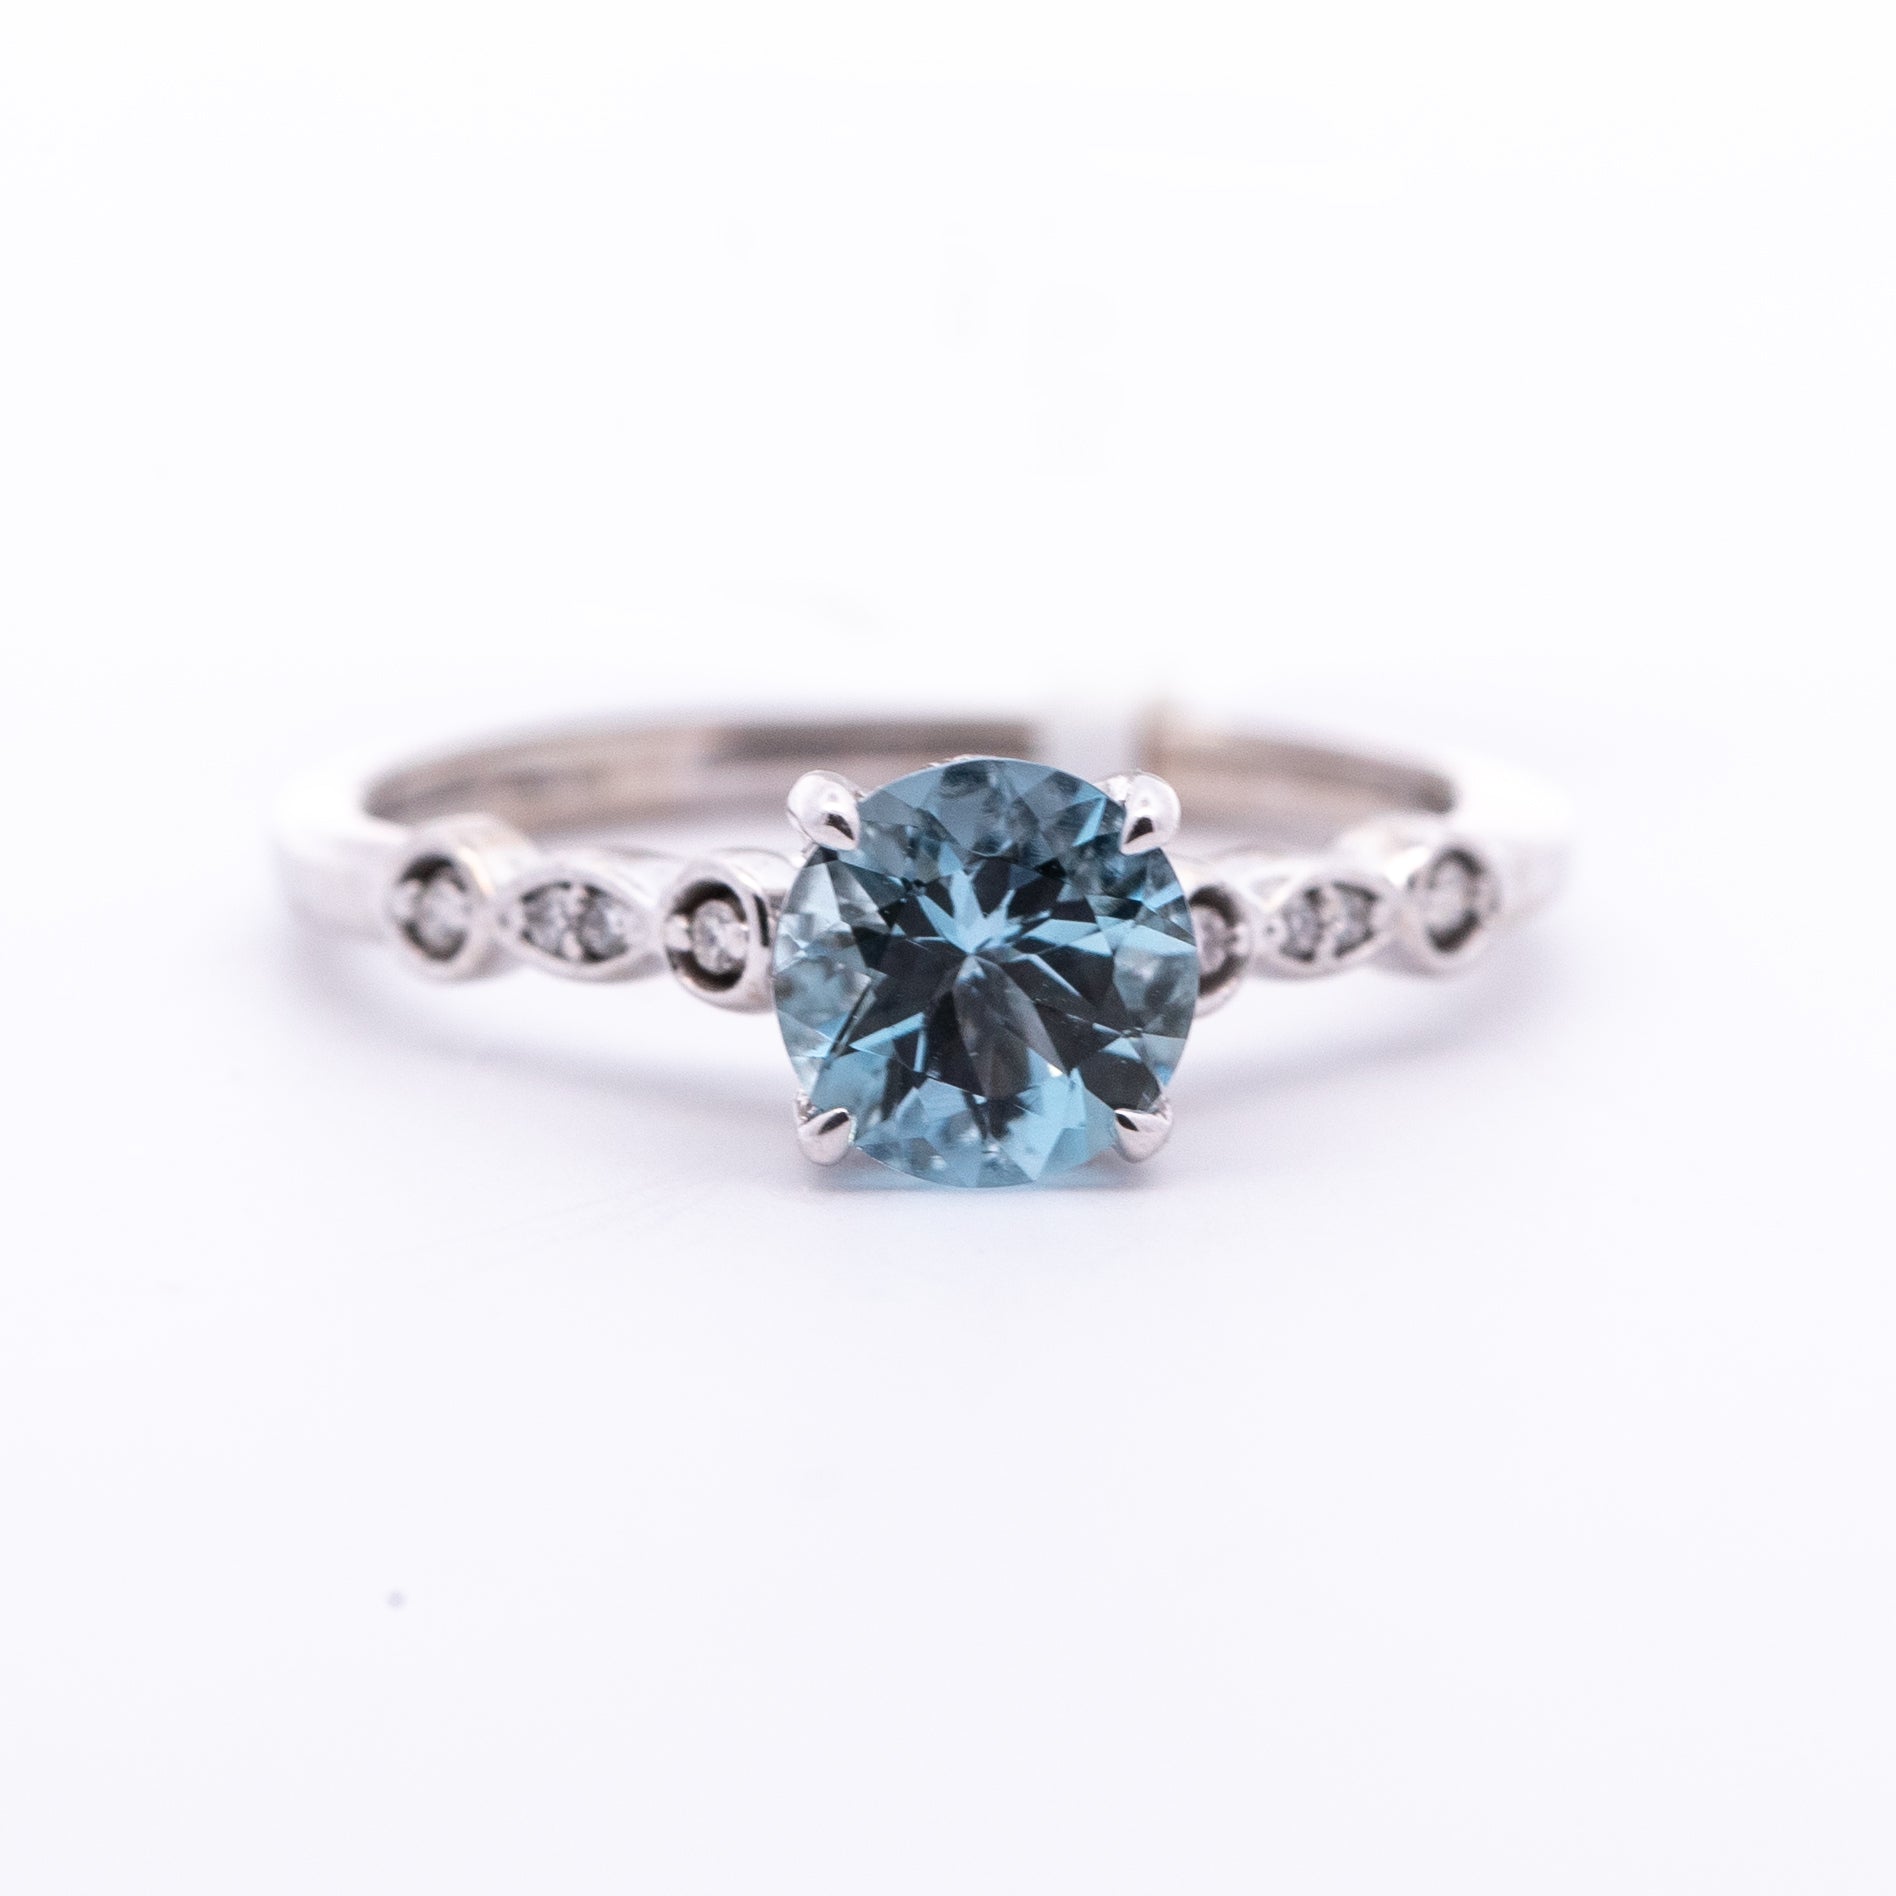 Style: Inspired Description: Fashion Ring - Colored Stone Rings - Womens